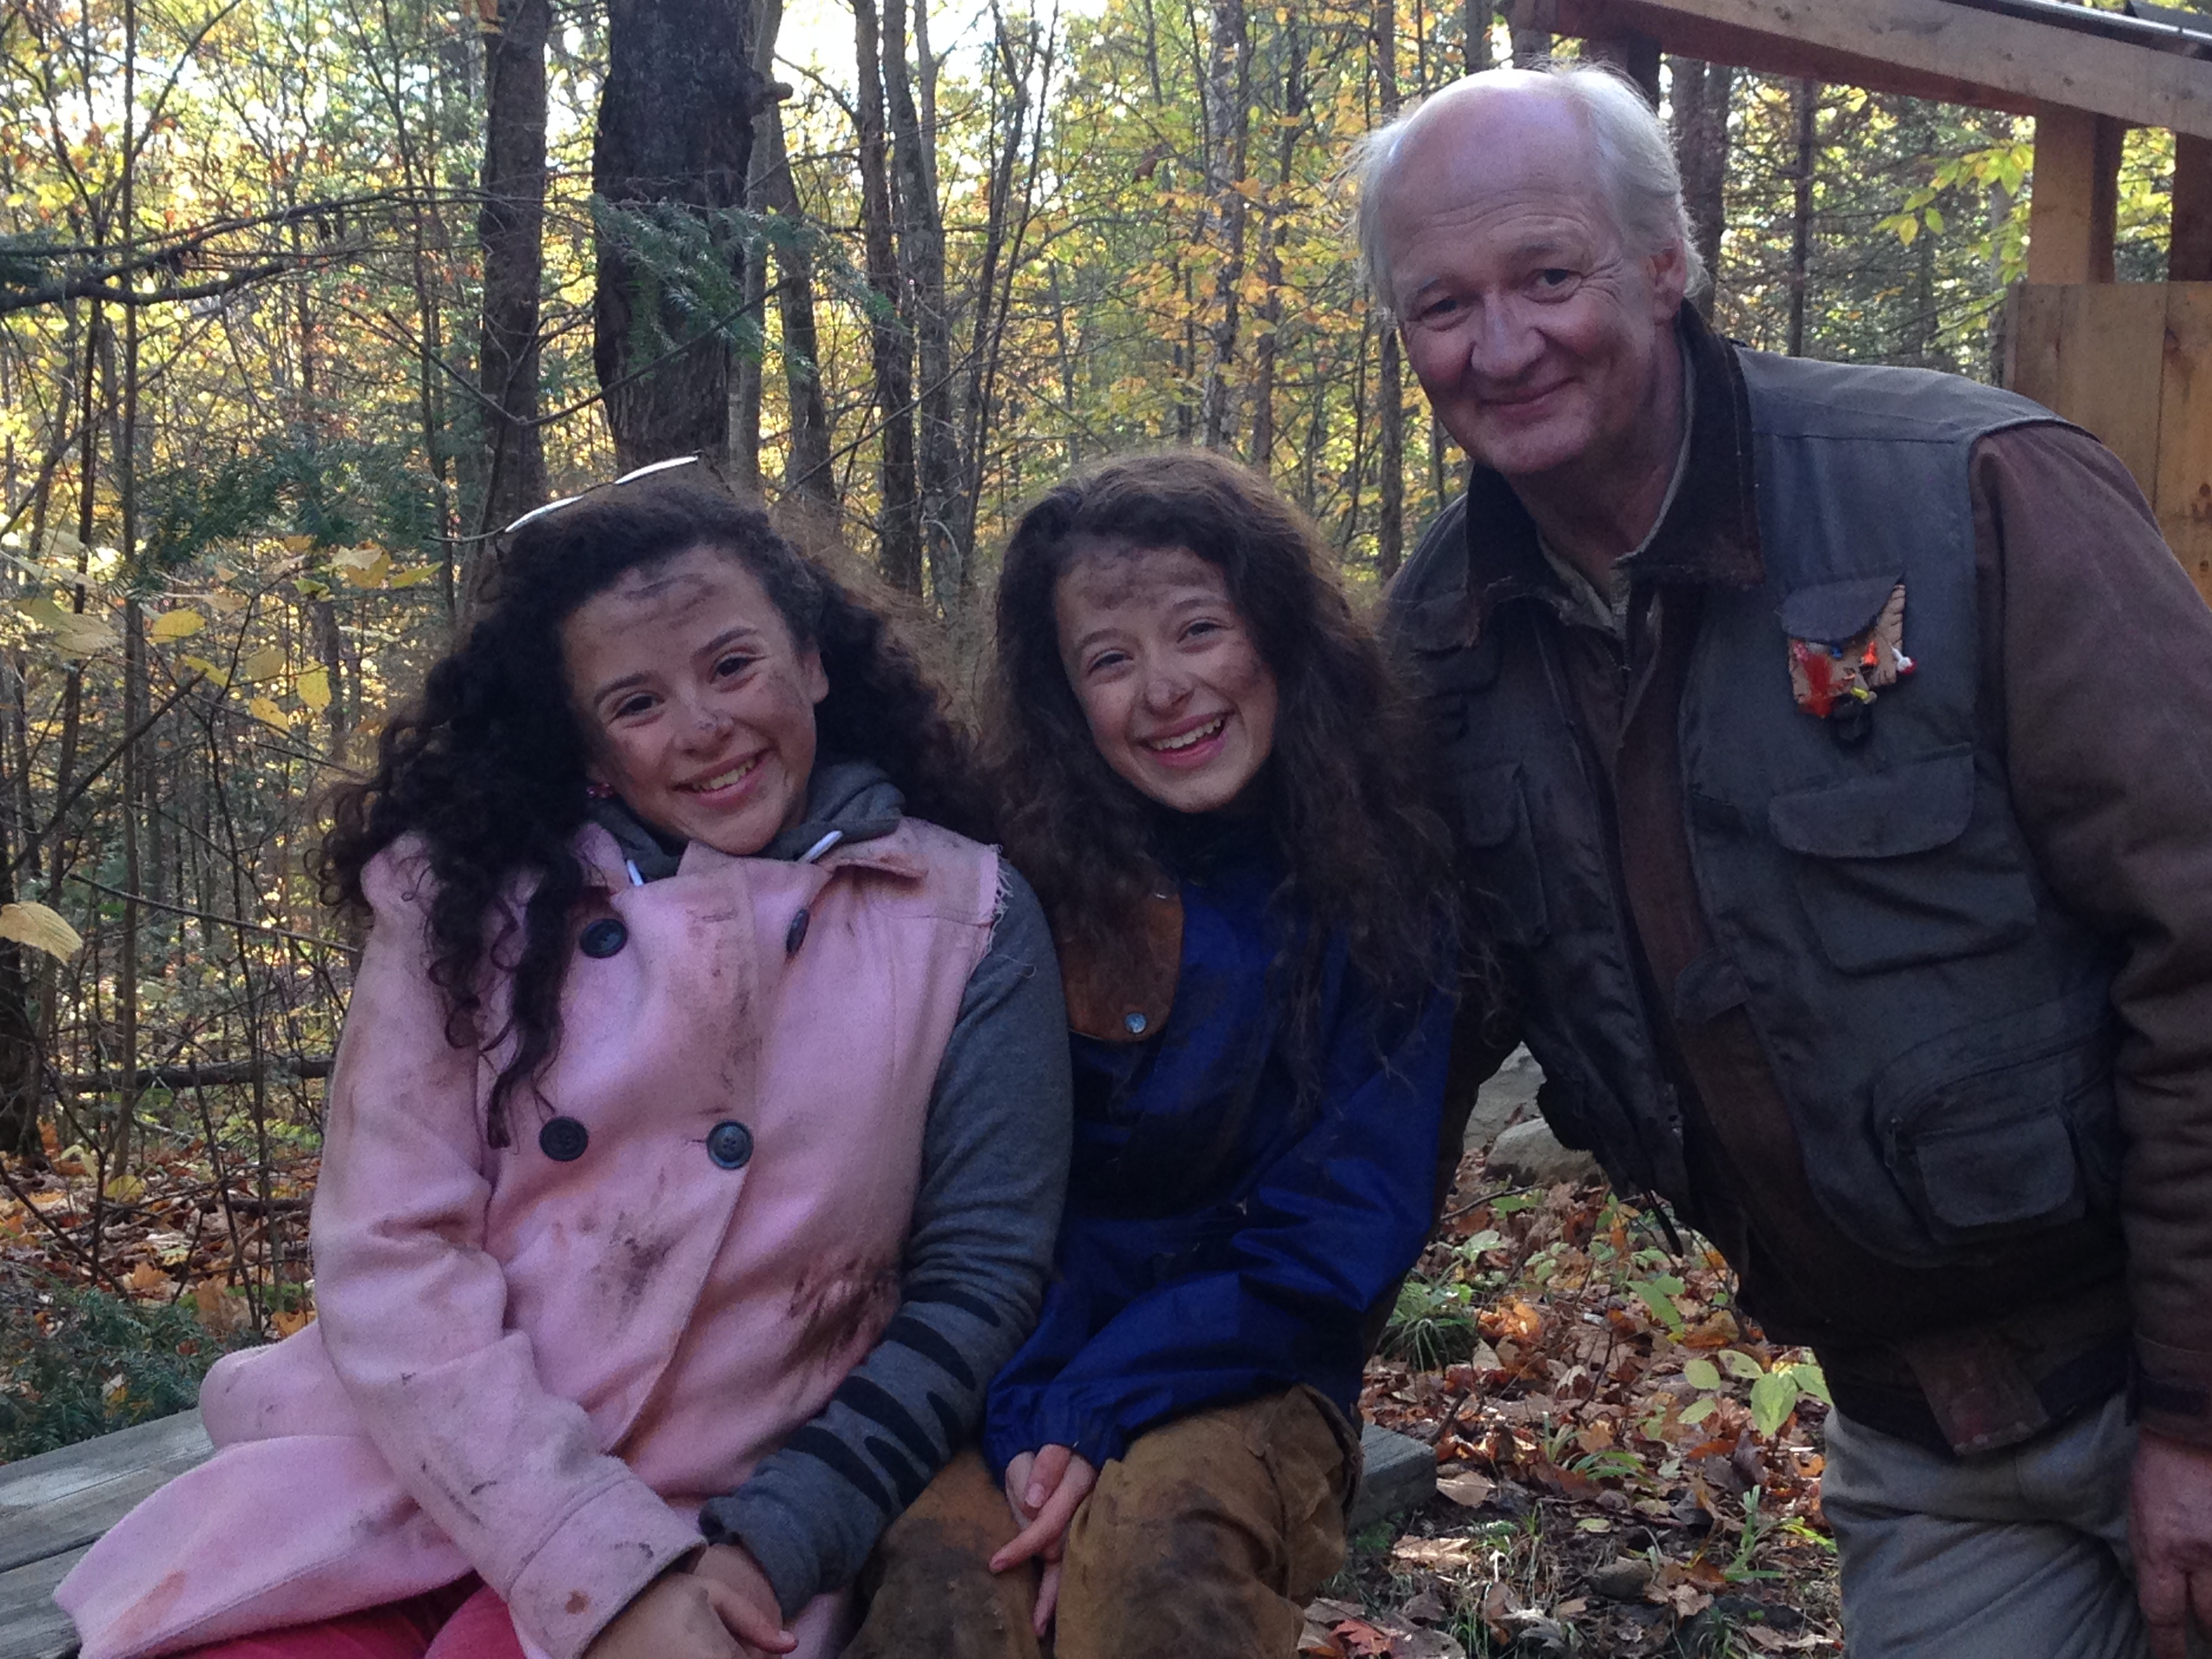 On the set of Annedroids with Addison Holley and Colin Mochrie